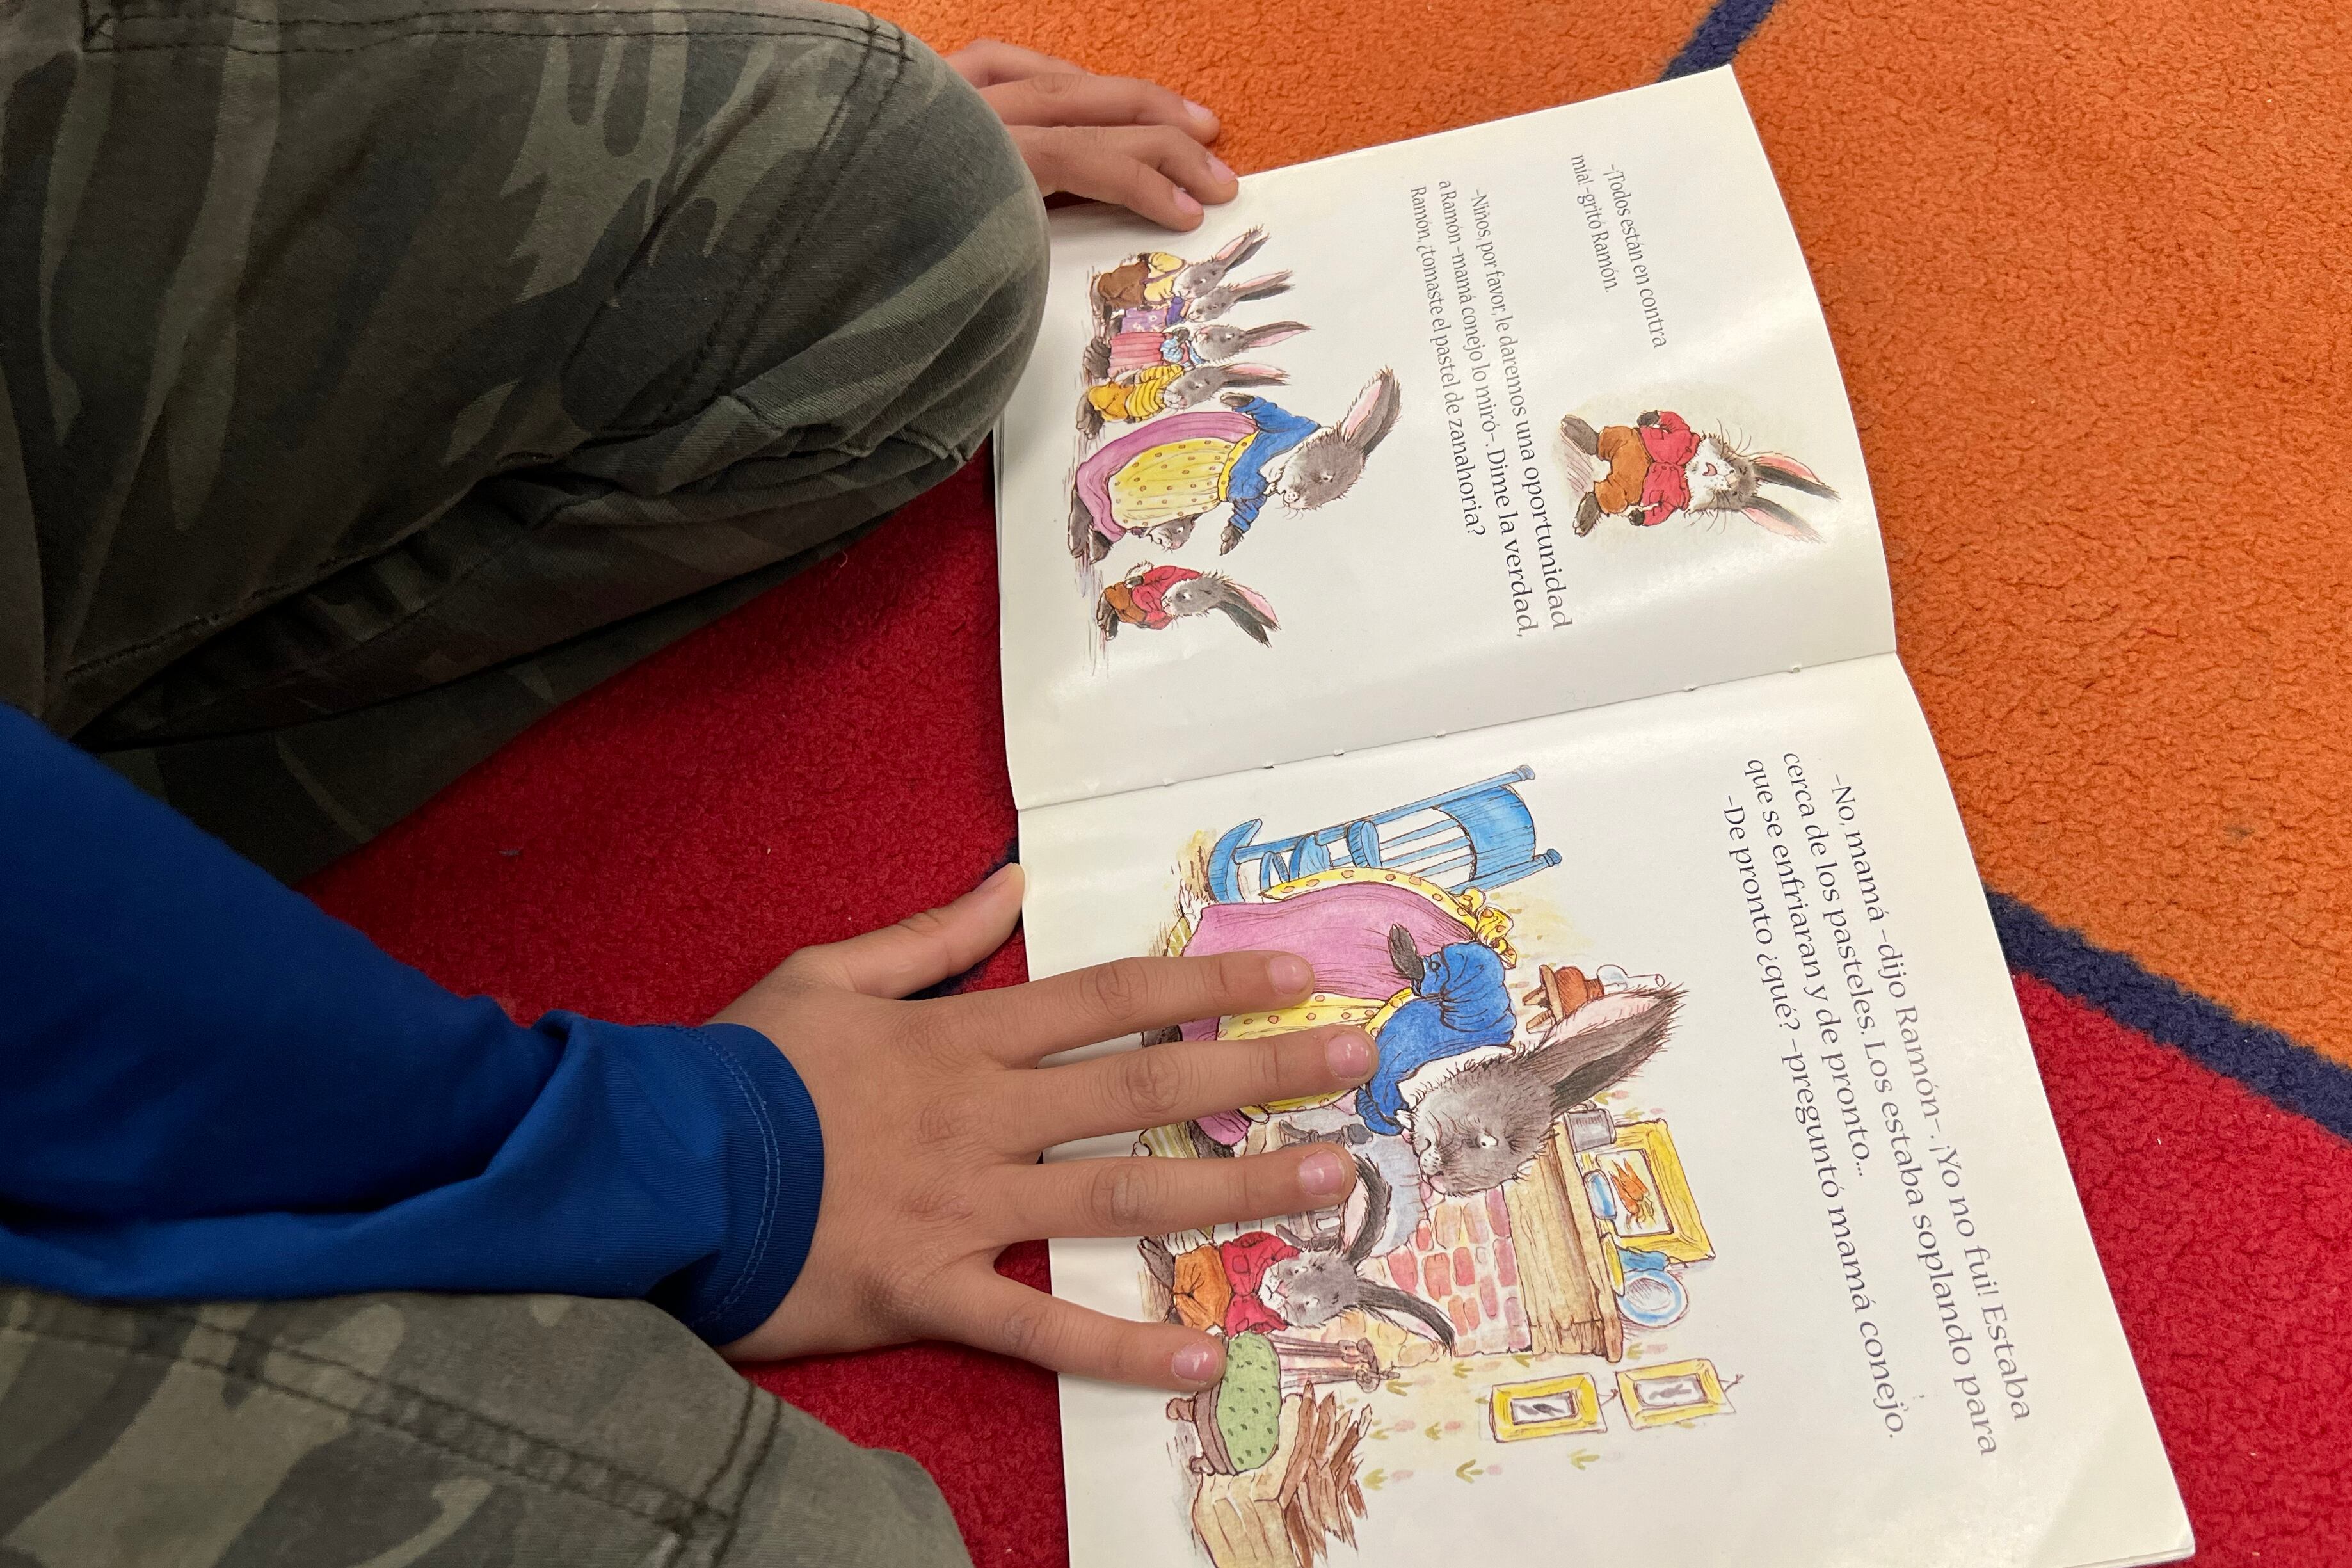 Close up of a young student's hands holding down the pages of a book on a colorful rug.